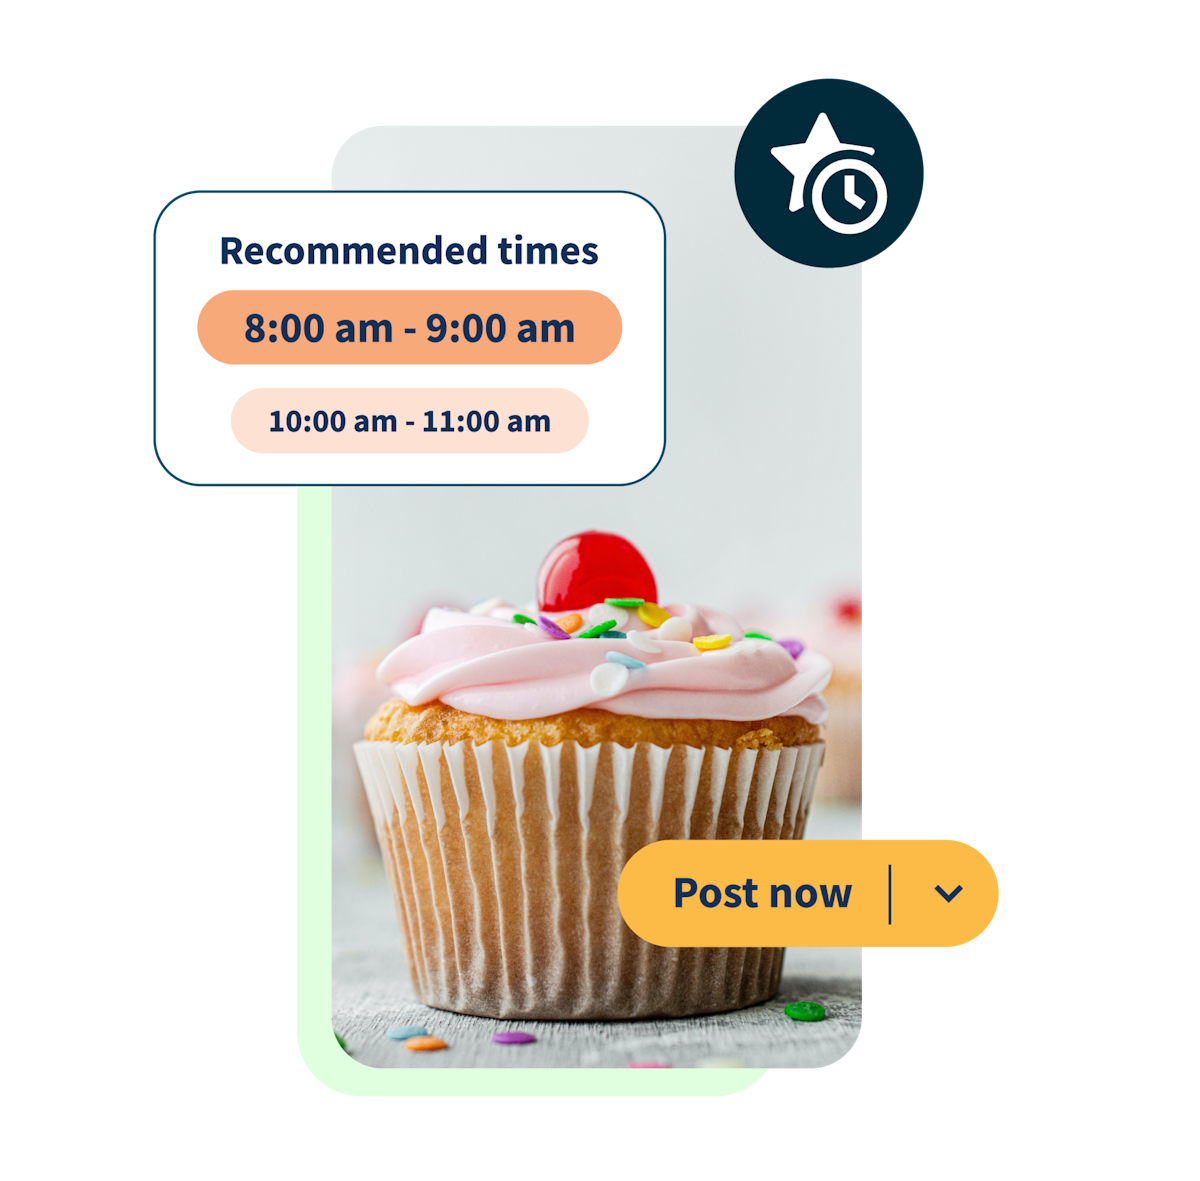 Image of a cupcake with buttons saying "post now" and "recommended times"